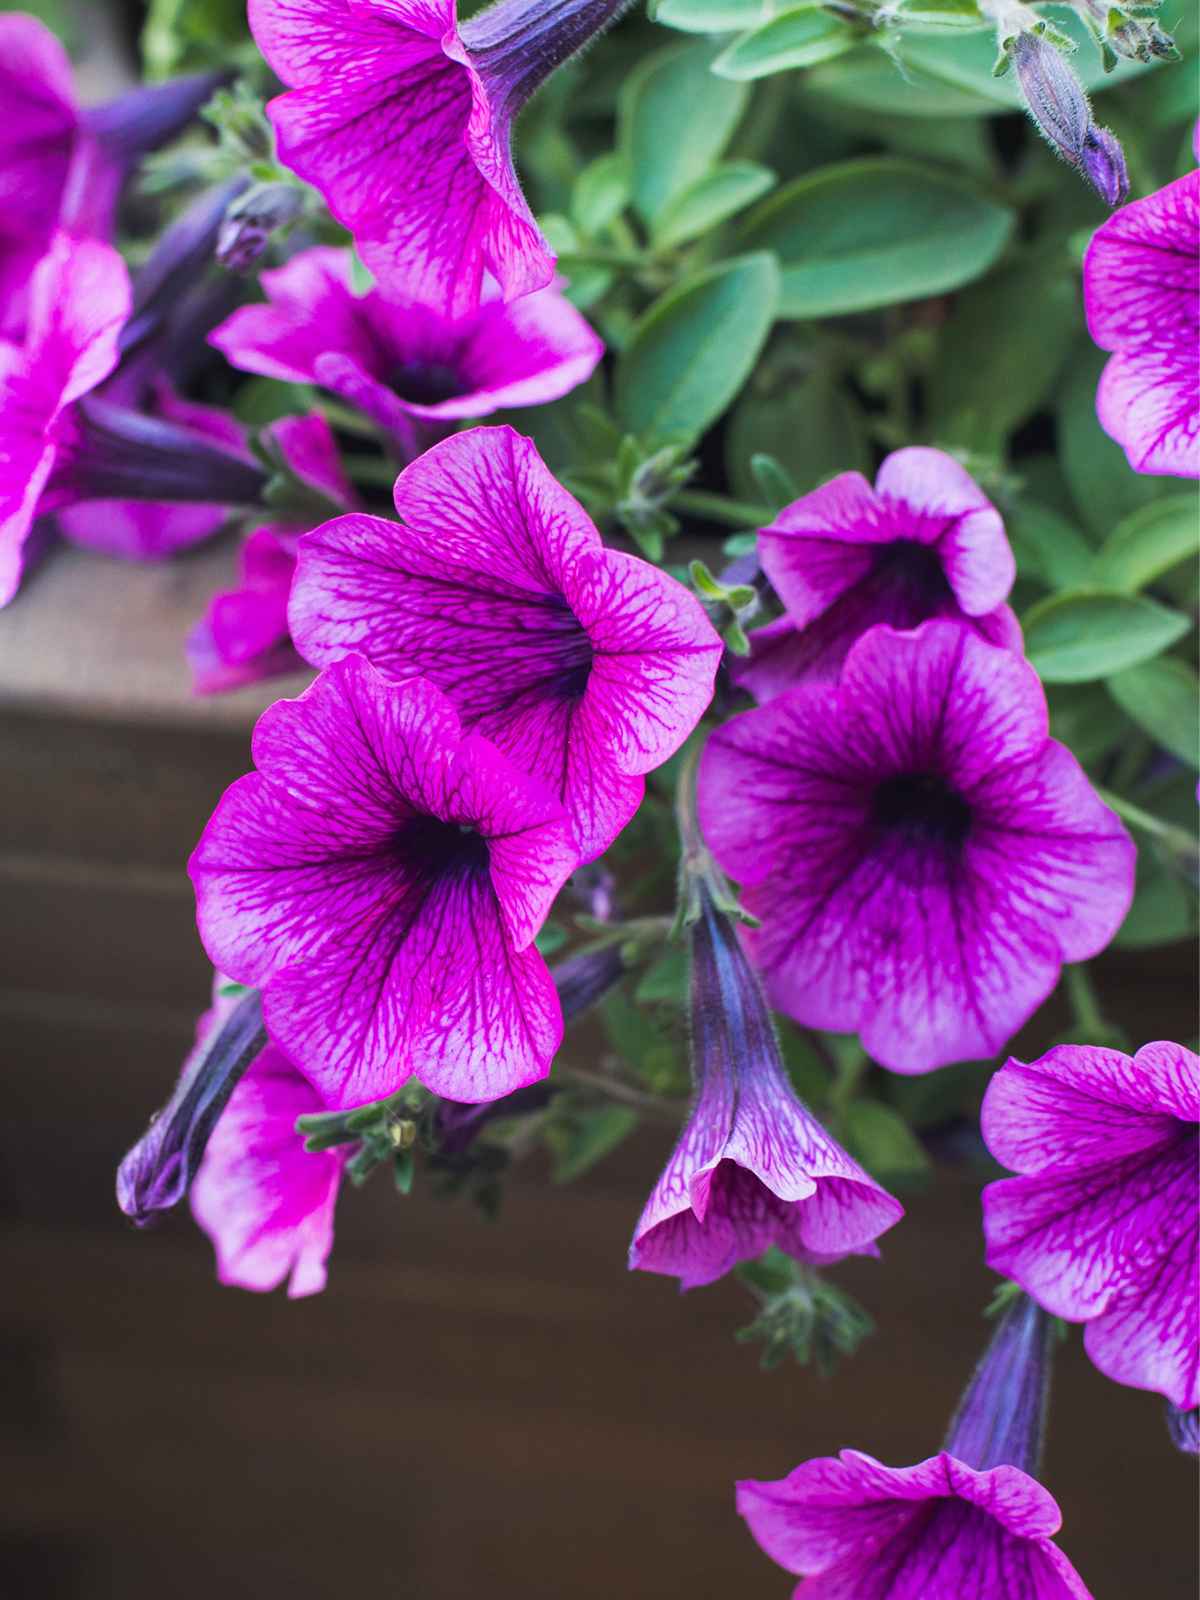 How to Grow and Care For Petunias